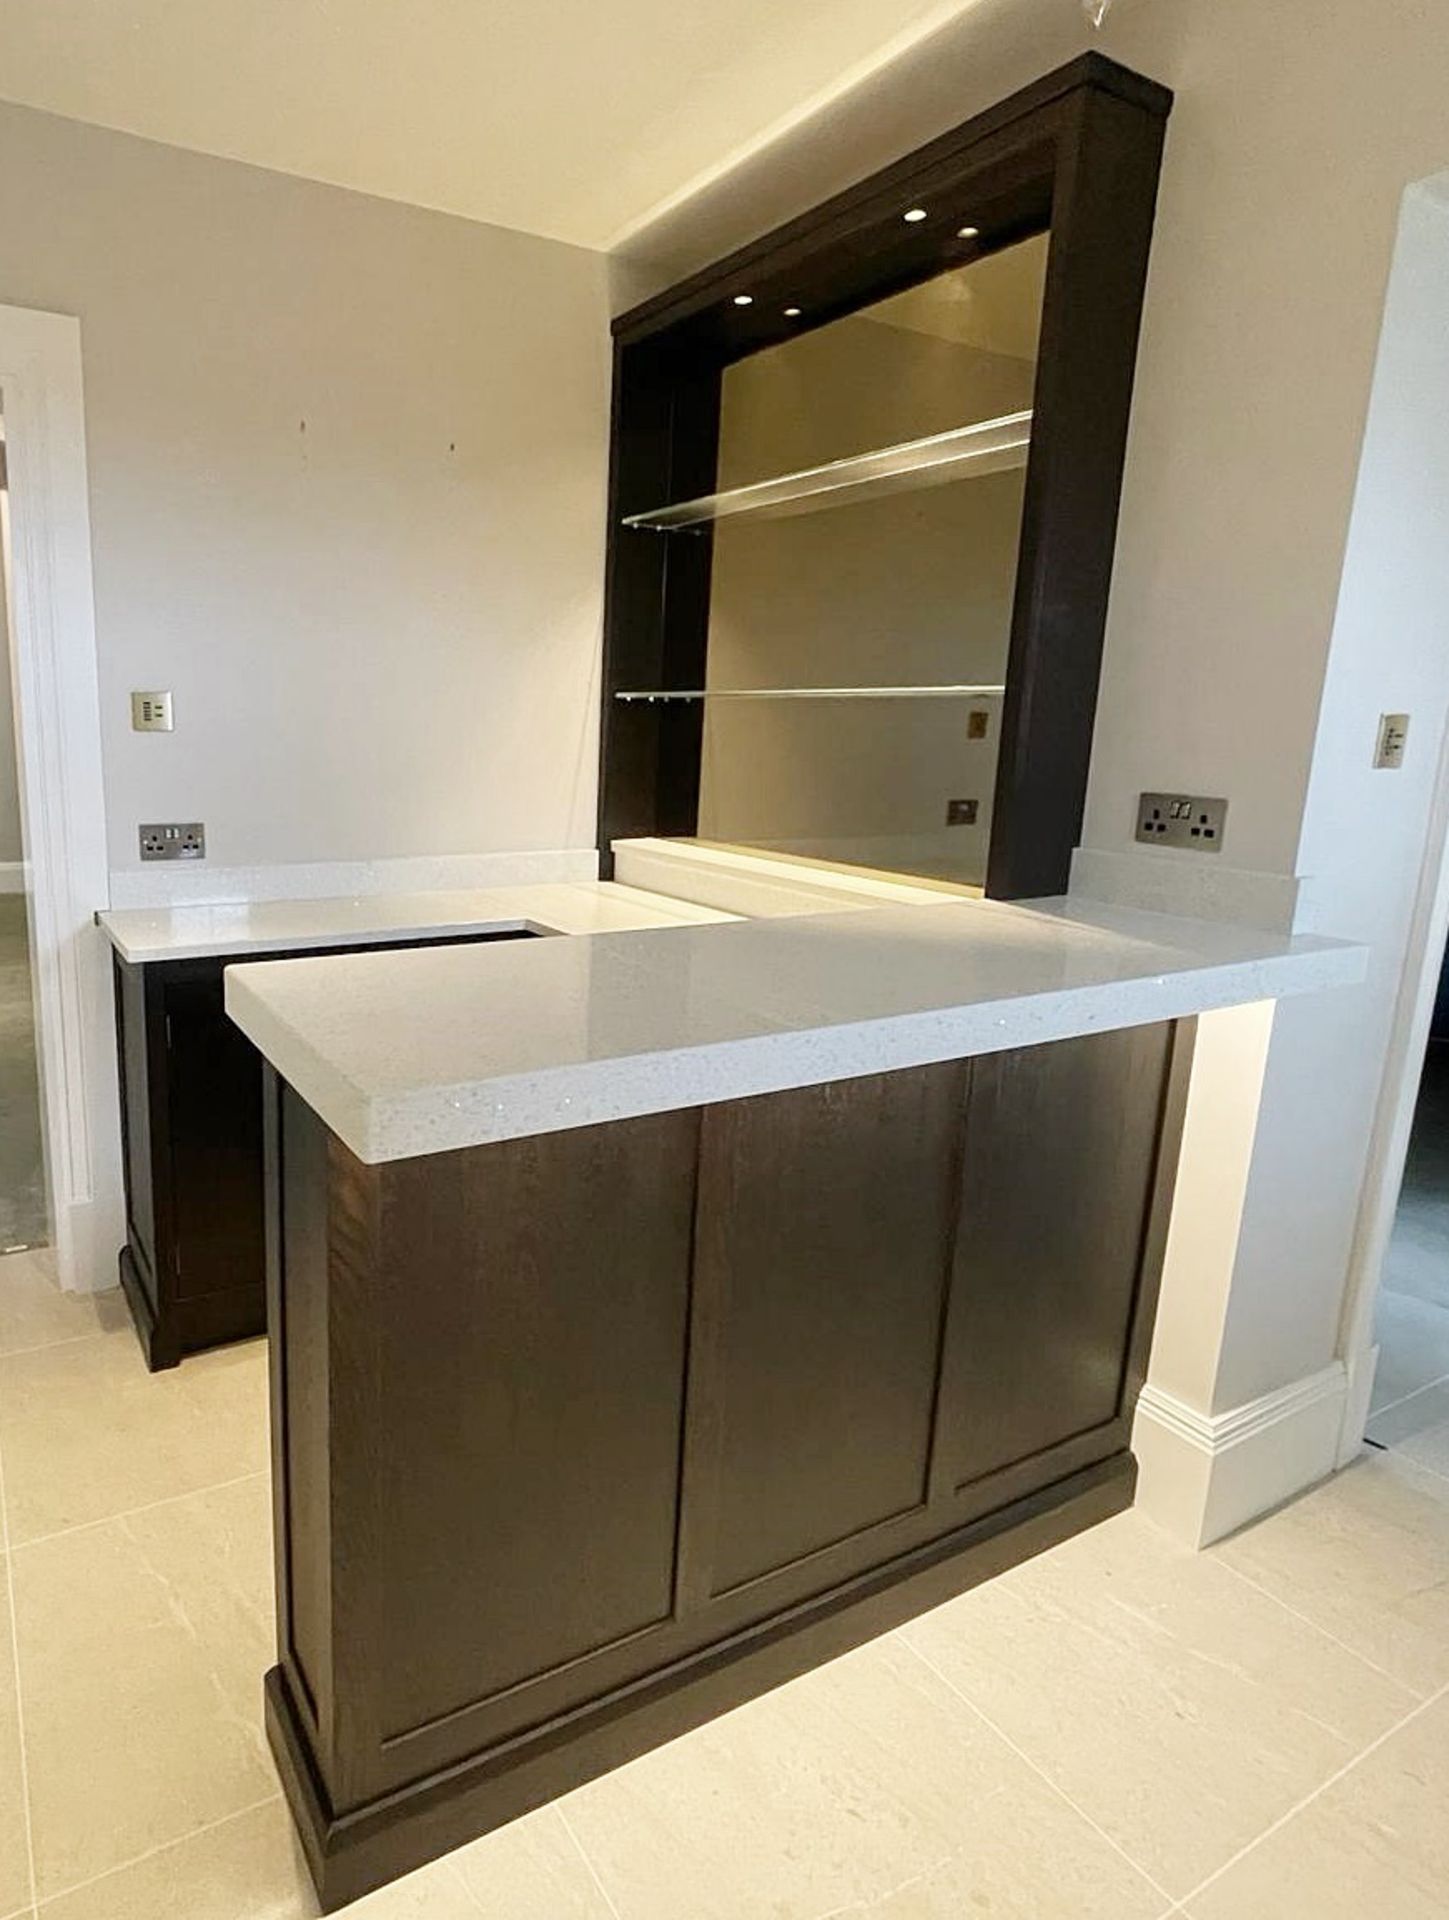 1 x Small Bespoke Fitted Luxury Home Bar with White Terrazzo Quartz Counter - Image 3 of 19